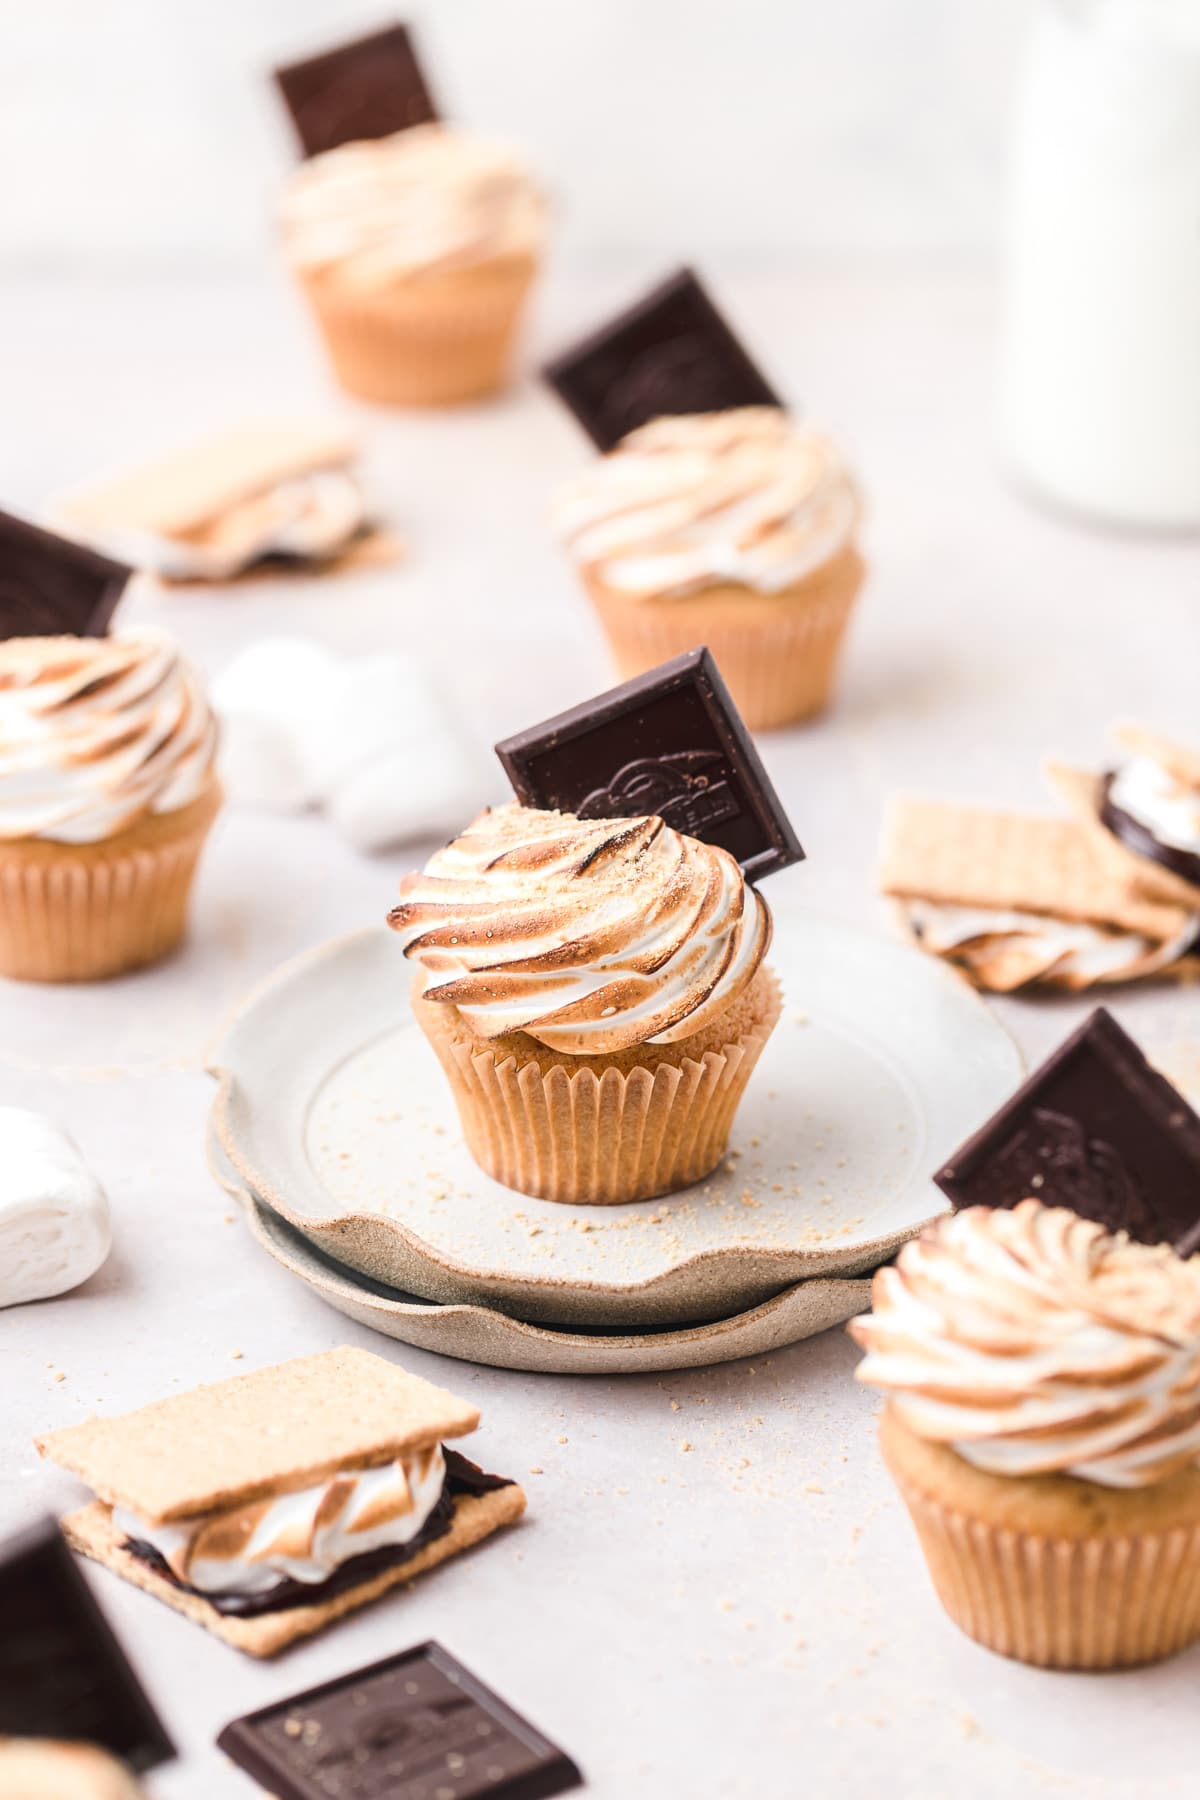 toasted smore's cupcakes with chocolate pieces on top.